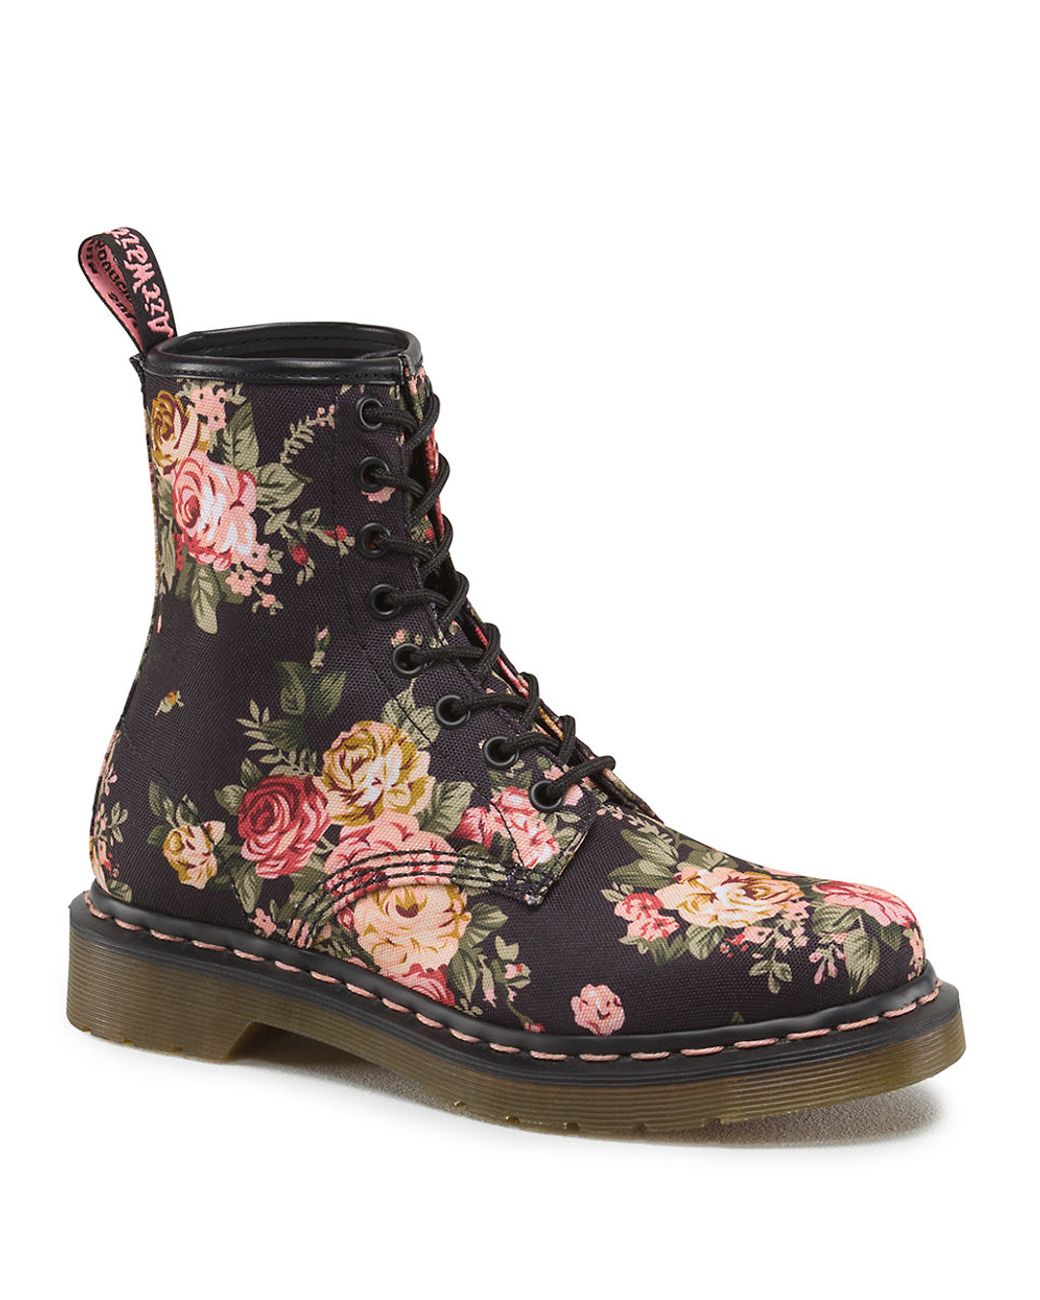 Dr. Martens 1460 W Floral Printed Boots in Black | Lyst